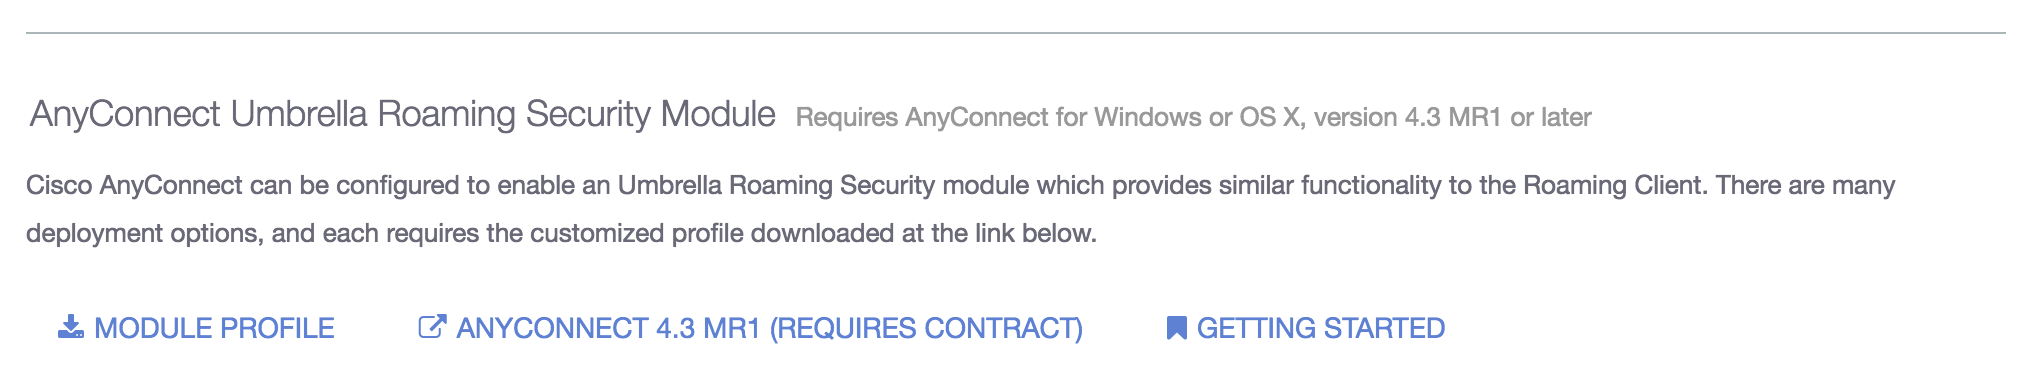 cisco anyconnect secure mobility client profile xml windows 10